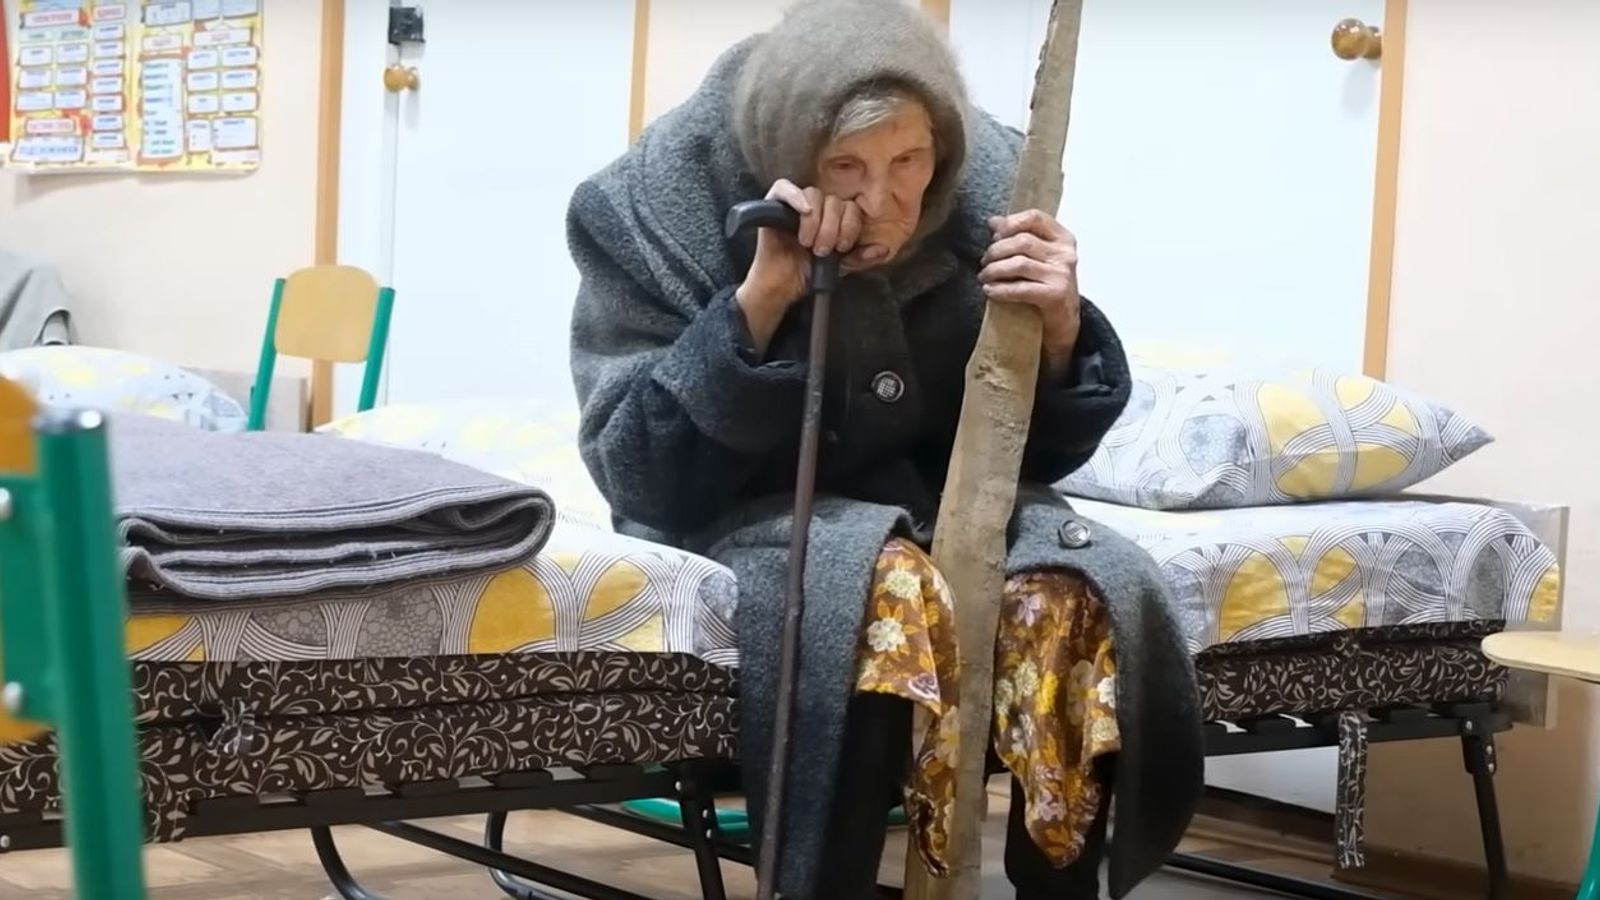 98-year-old woman escapes Russian-occupied territory in Ukraine